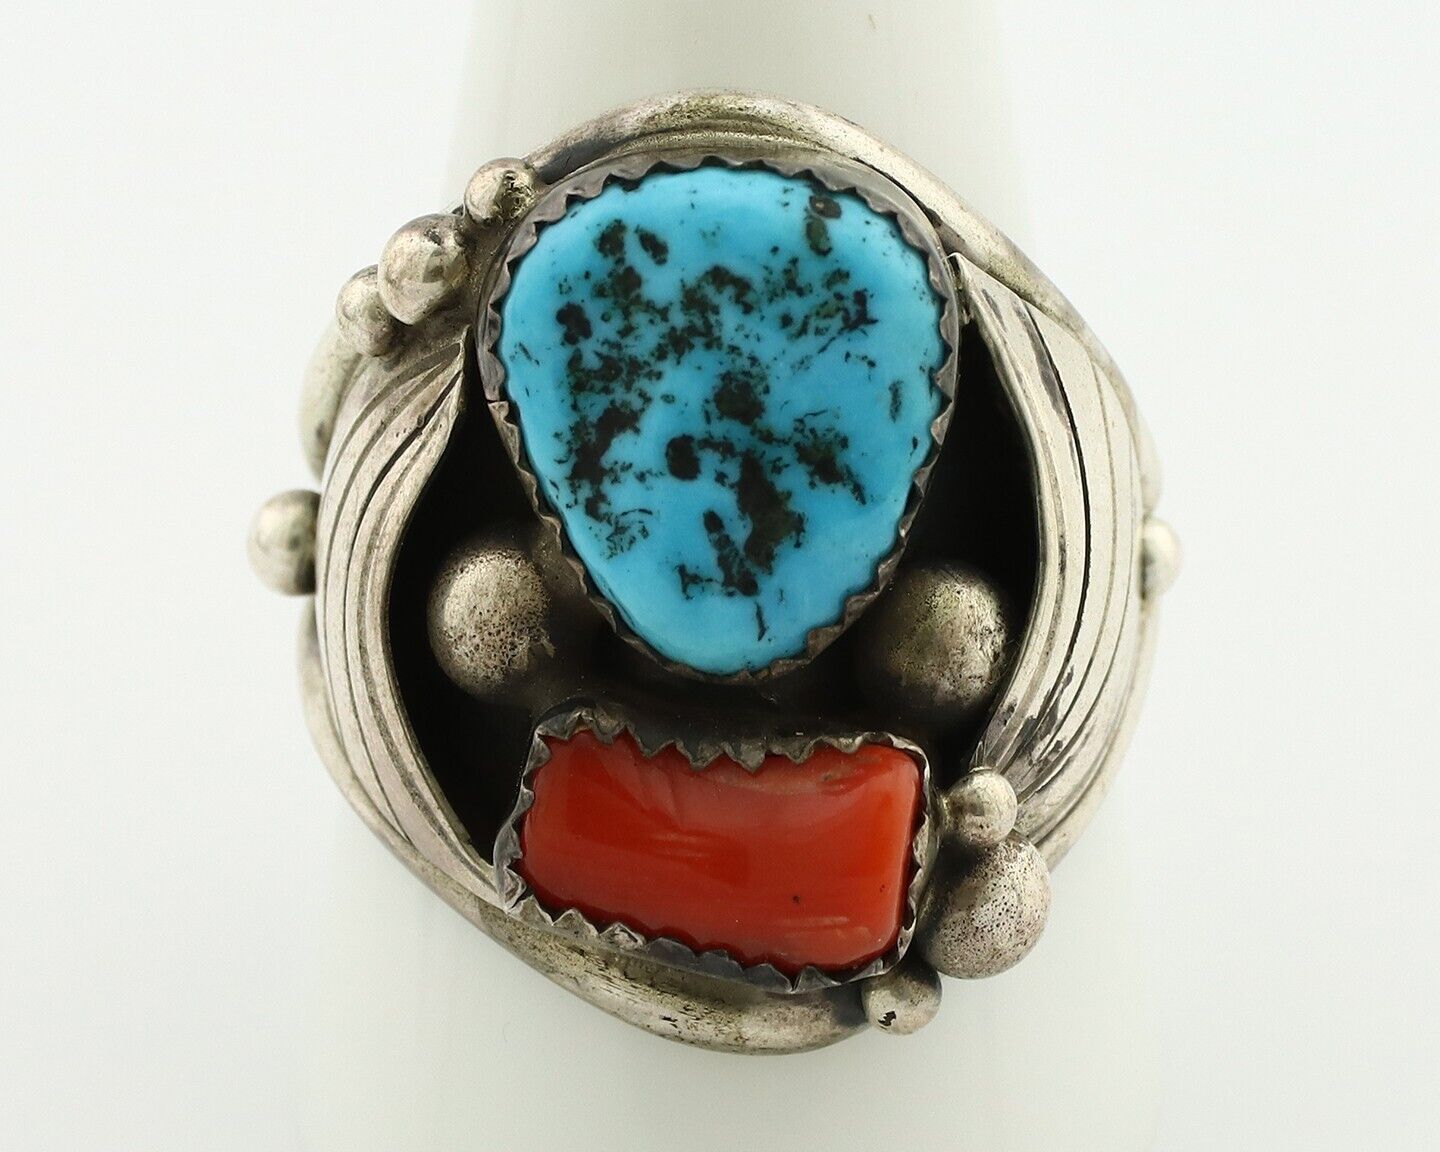 Zuni Ring 925 Silver Blue Turquoise & Coral Artsti Signed Patsy Allopowa C.80's